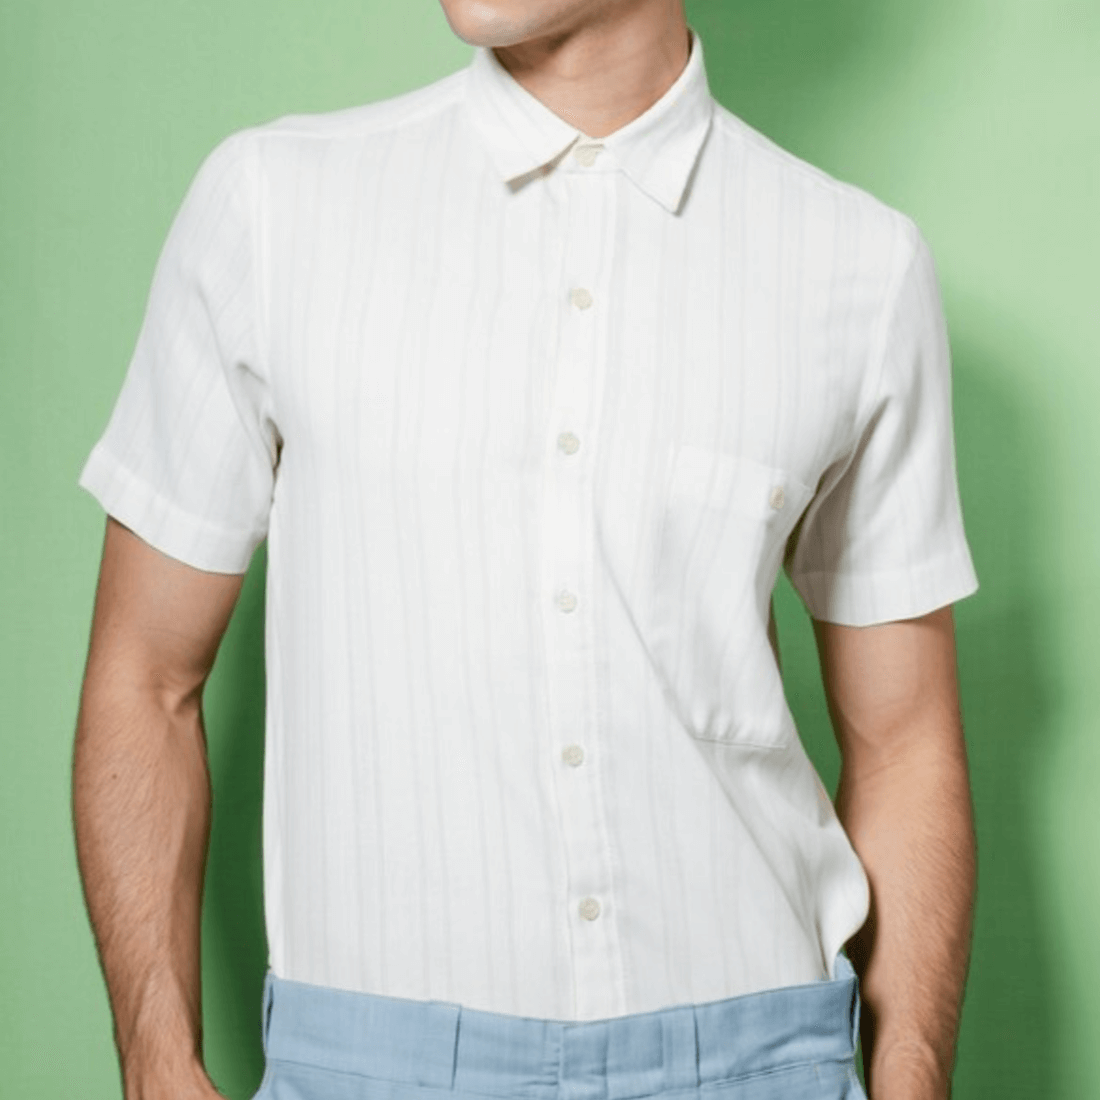 How to Choose the Right Men's Button-Up Short-Sleeve Supplier - Blog ...